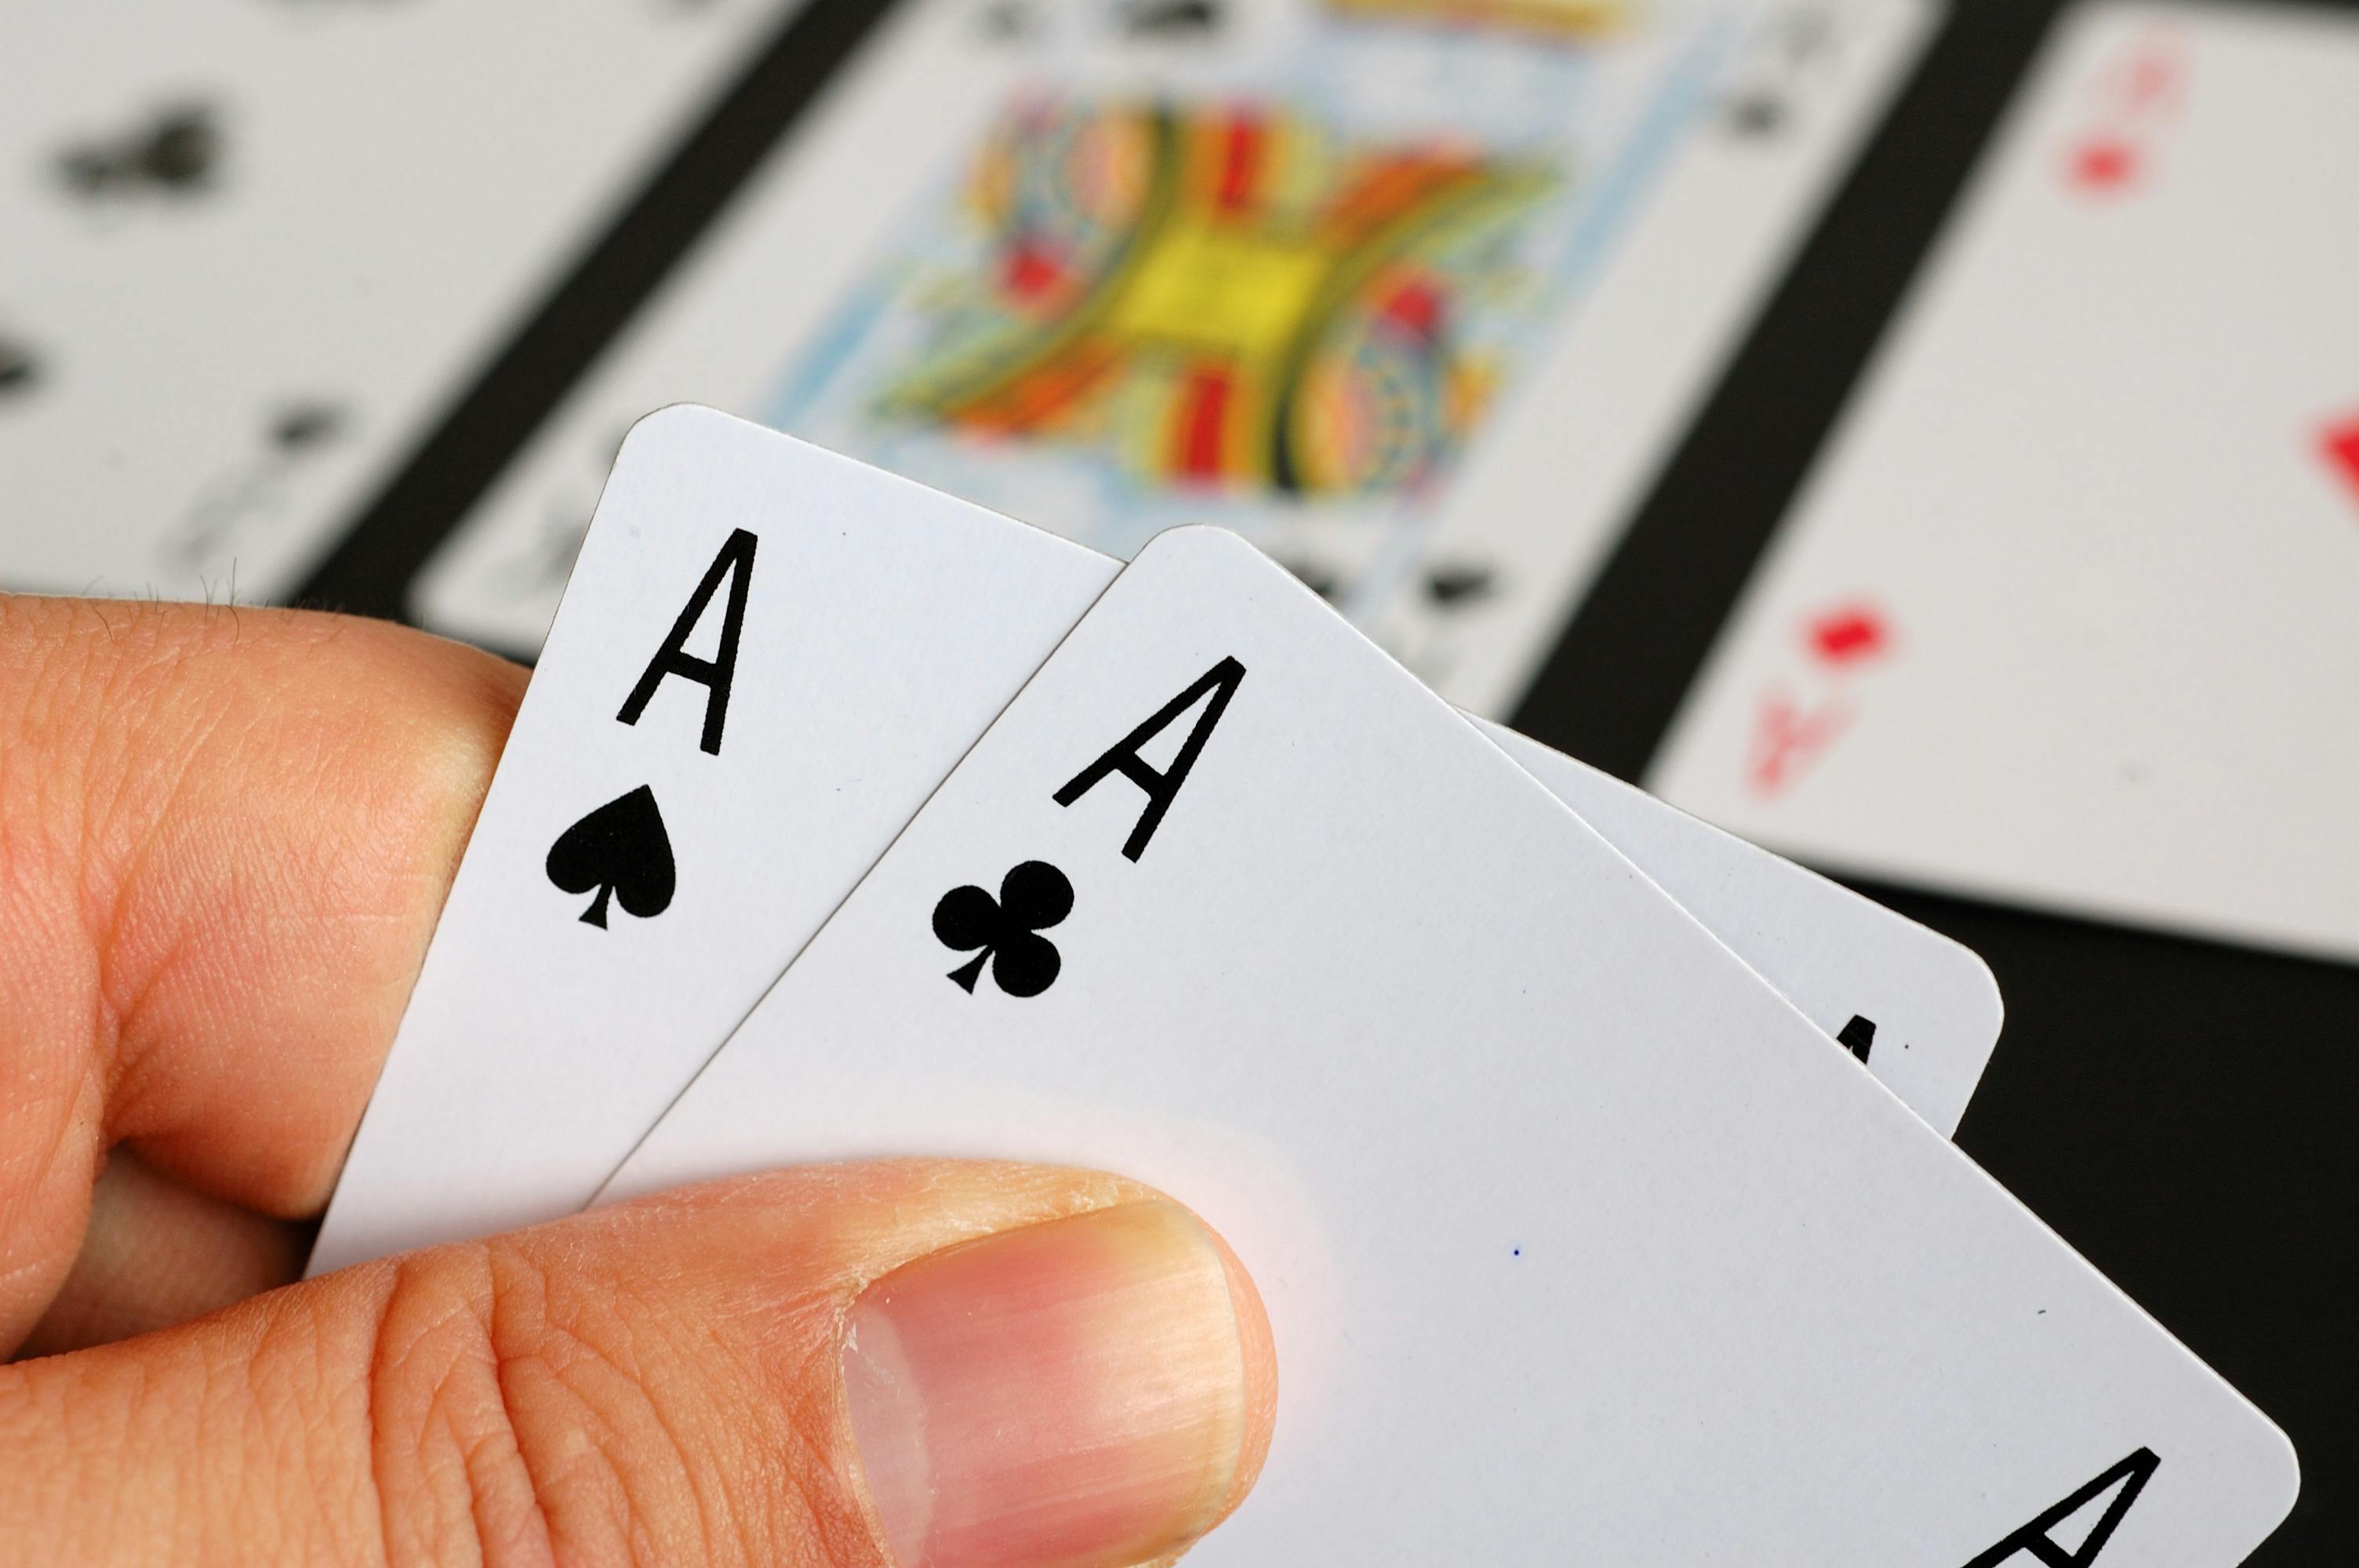 4 of Spade Playing Card · Free Stock Photo